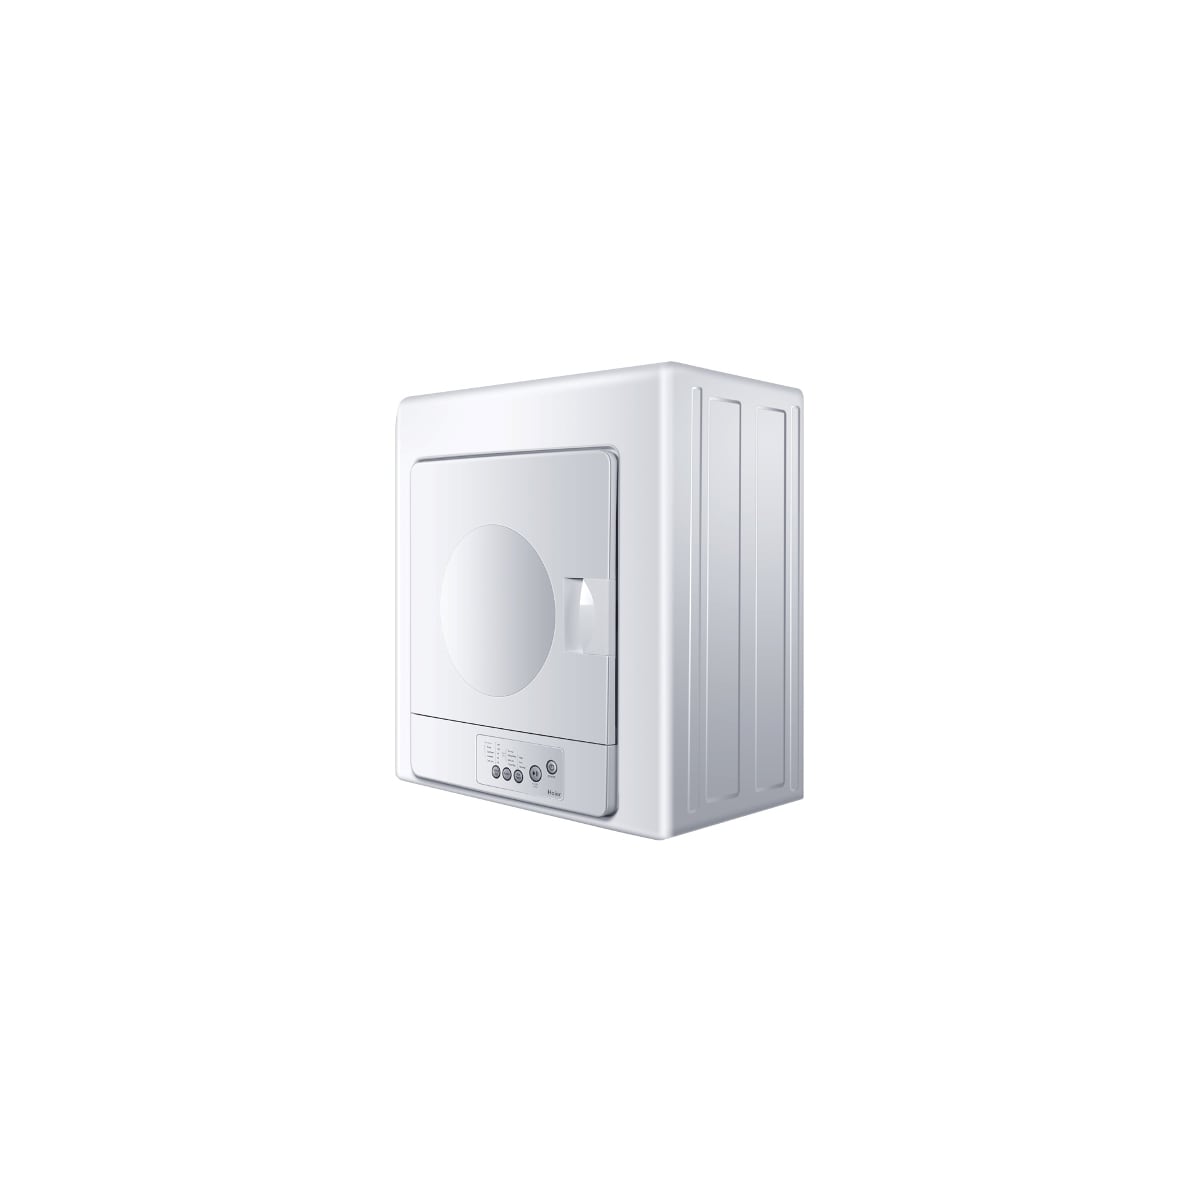 HLP141E by Haier - 2.6 cu. ft. Portable Electric Vented Dryer